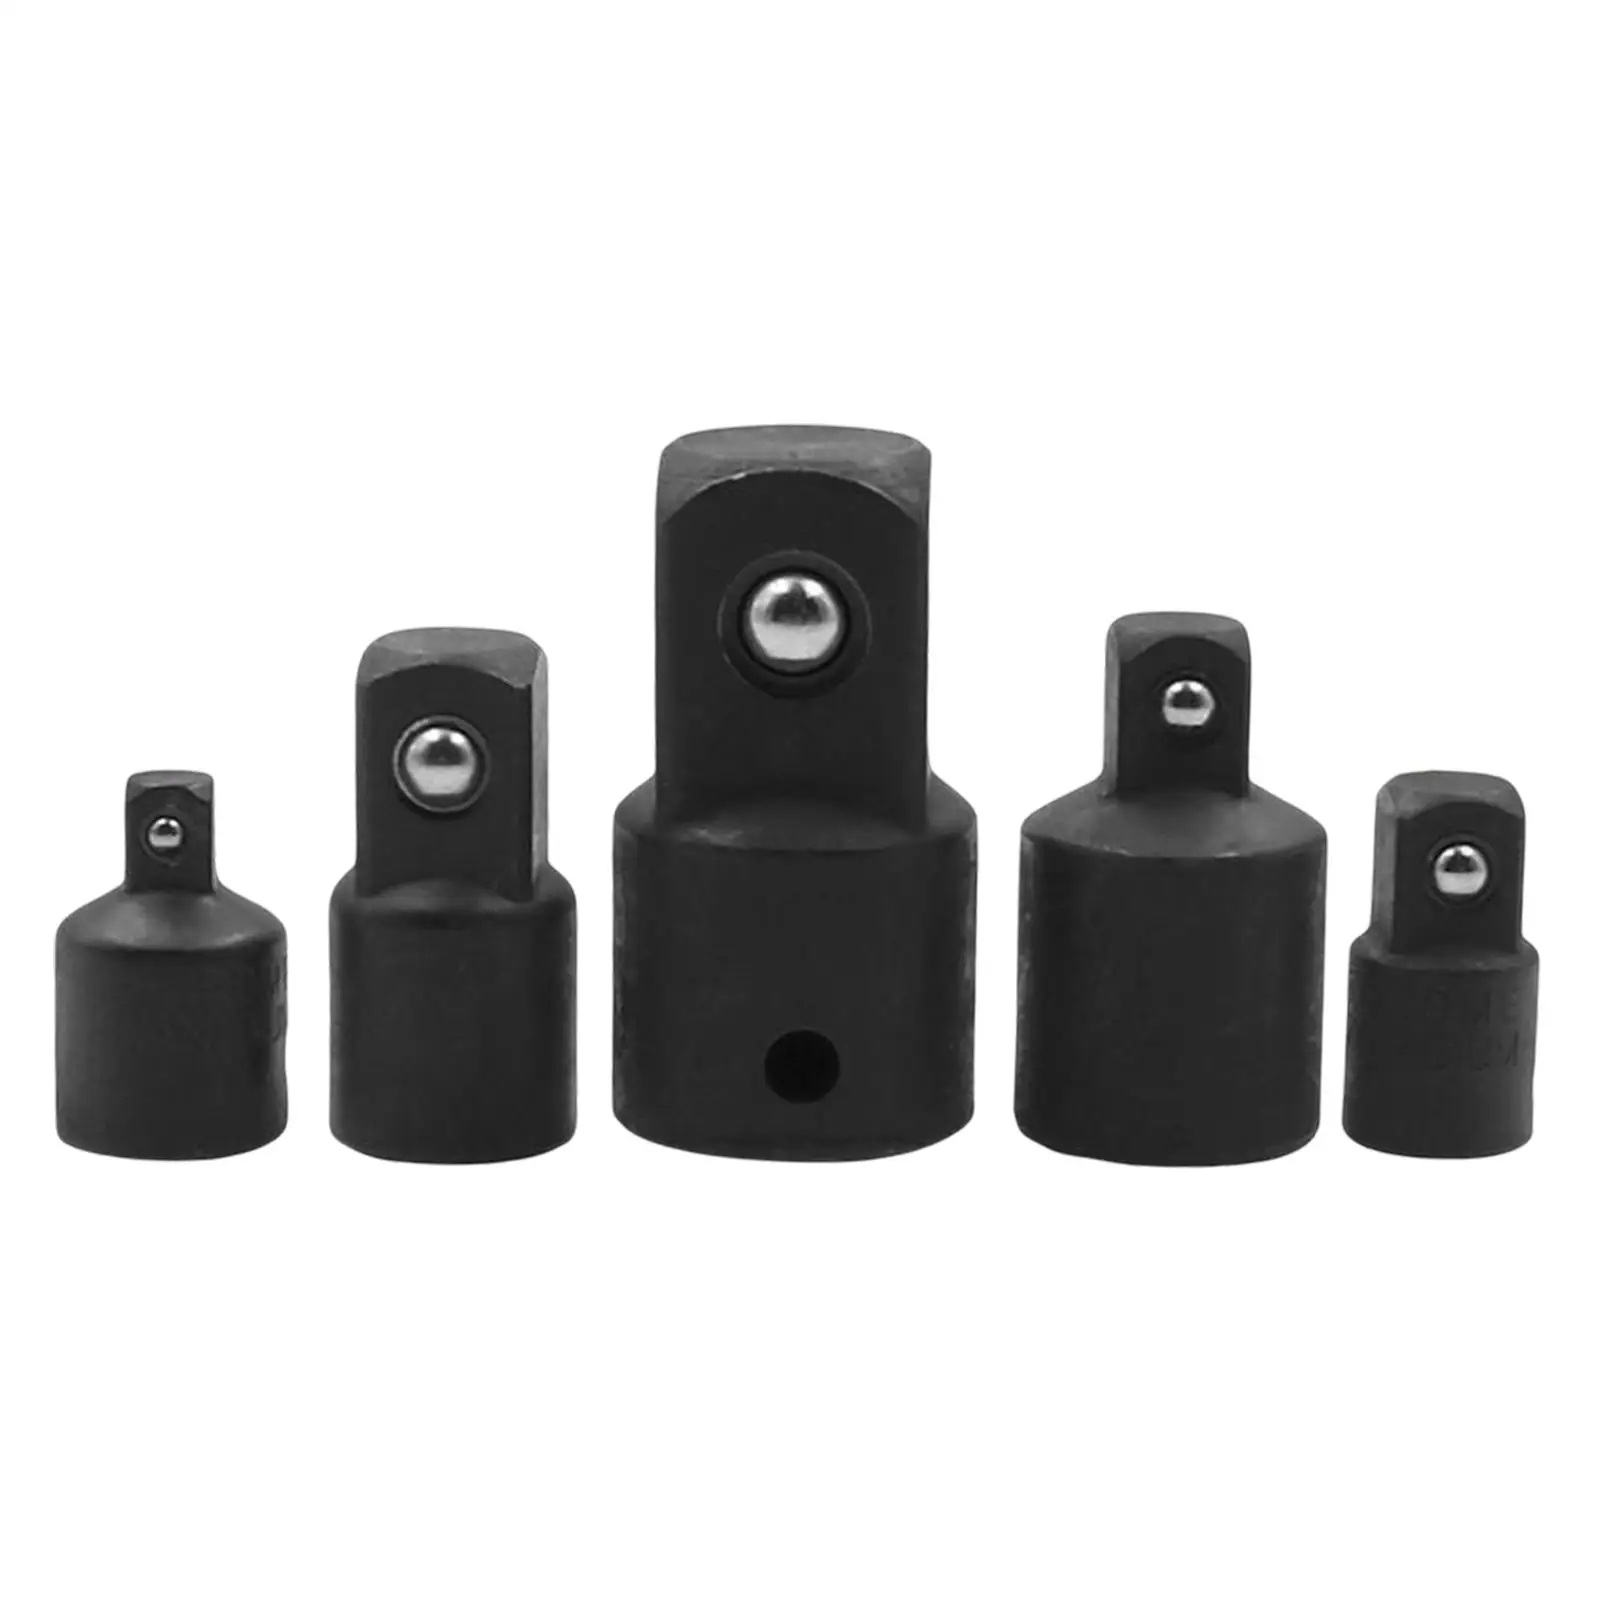 5x Impact Socket Adapter and Reducer Professional Manufactured  Spring Loaded for Construction Converter